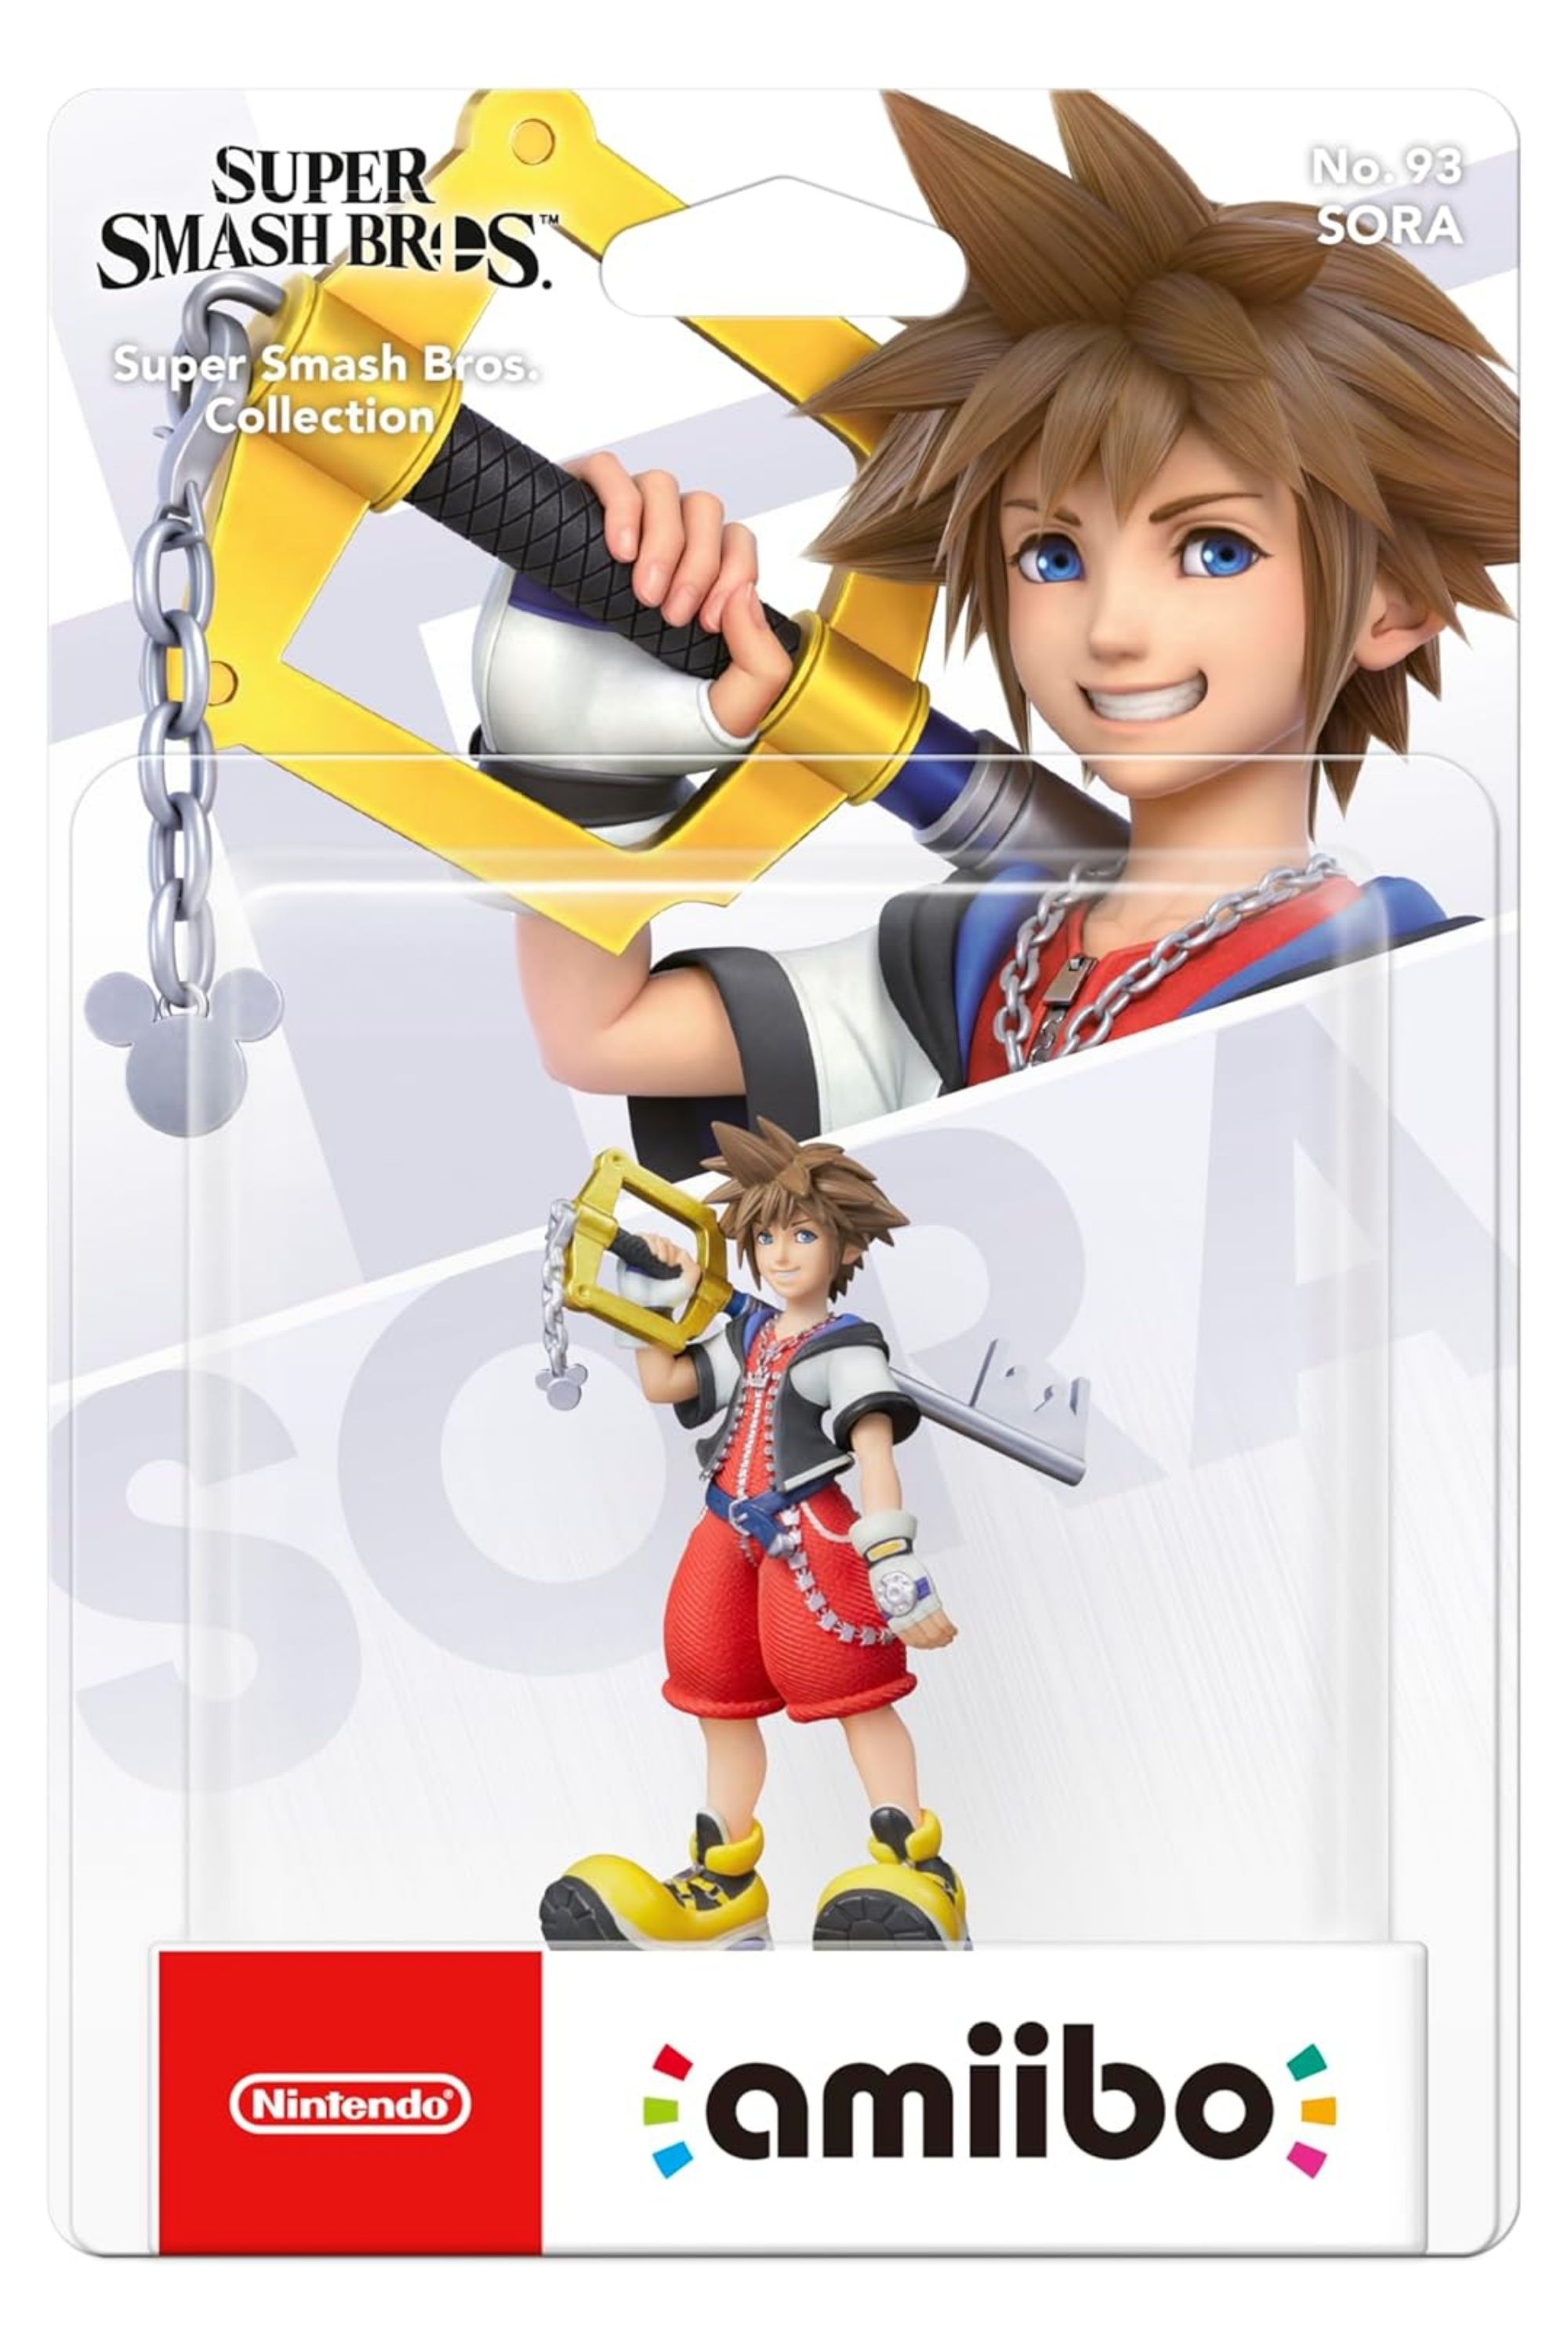 Will there ever be a Sora amiibo? – Exion